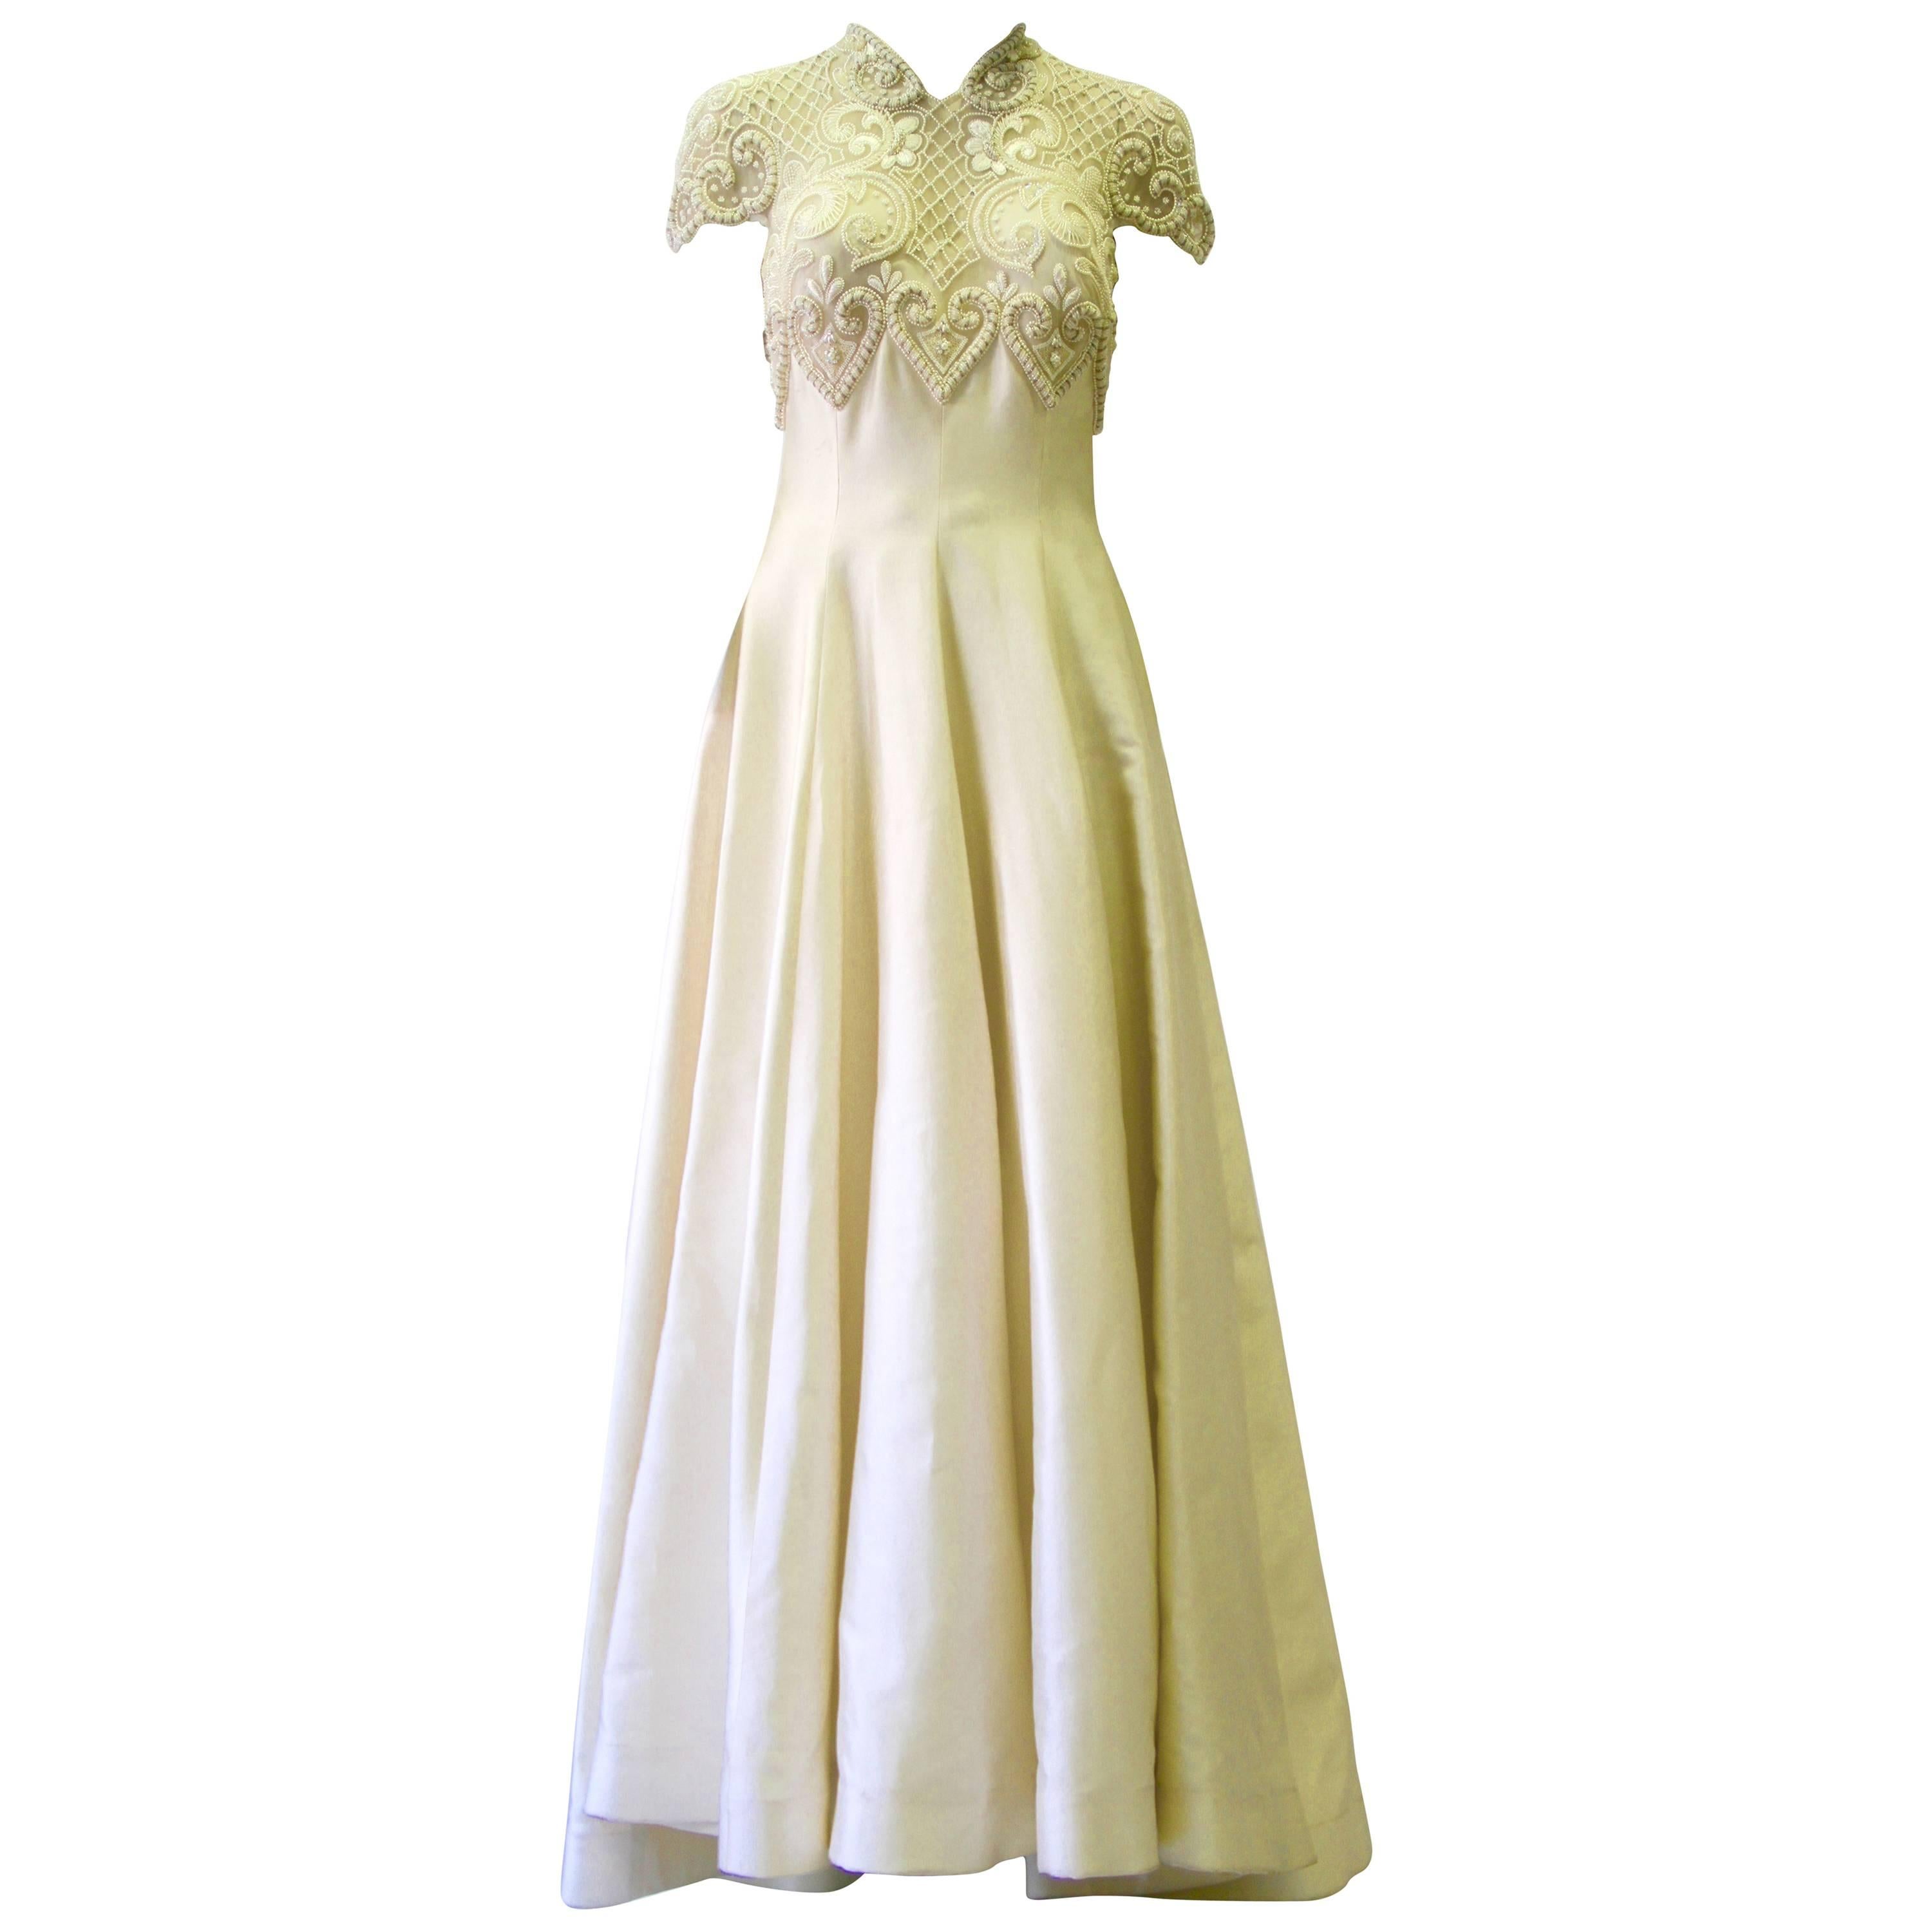 Important Pino Lancetti Hand Embroidered Duchess Satin Wedding Gown 1996 For Sale